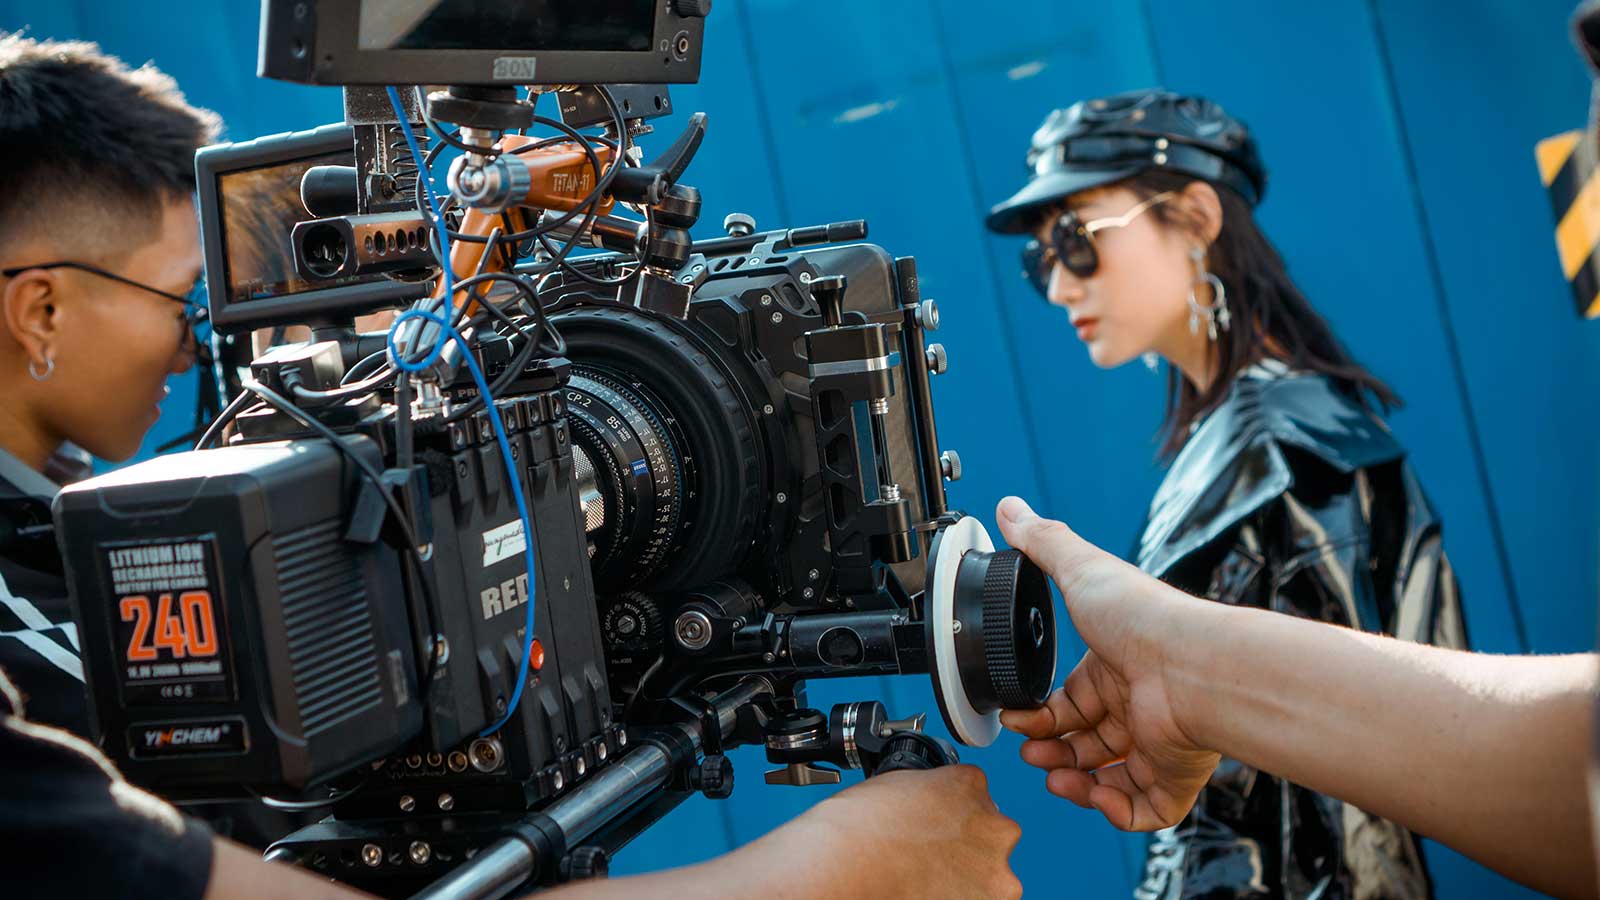 A model being filmed by a videographer holding a large camera.